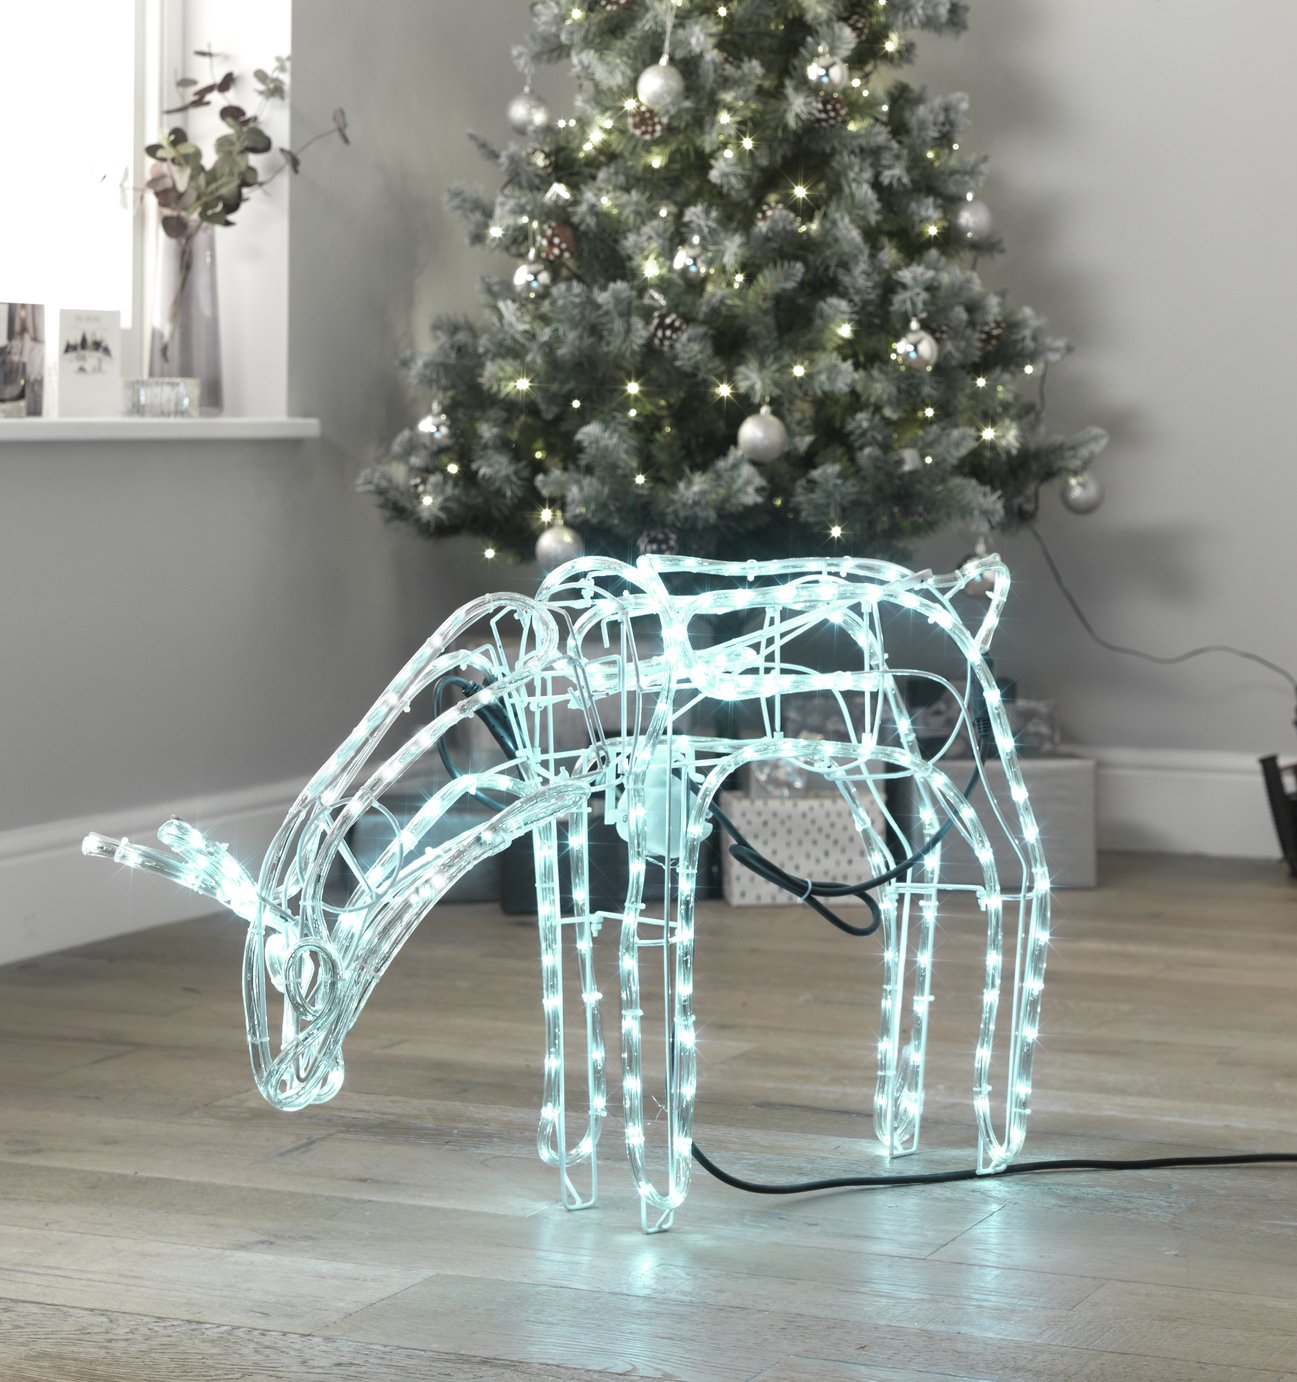 Argos Home LED Animated Grazing Reindeer - Bright White